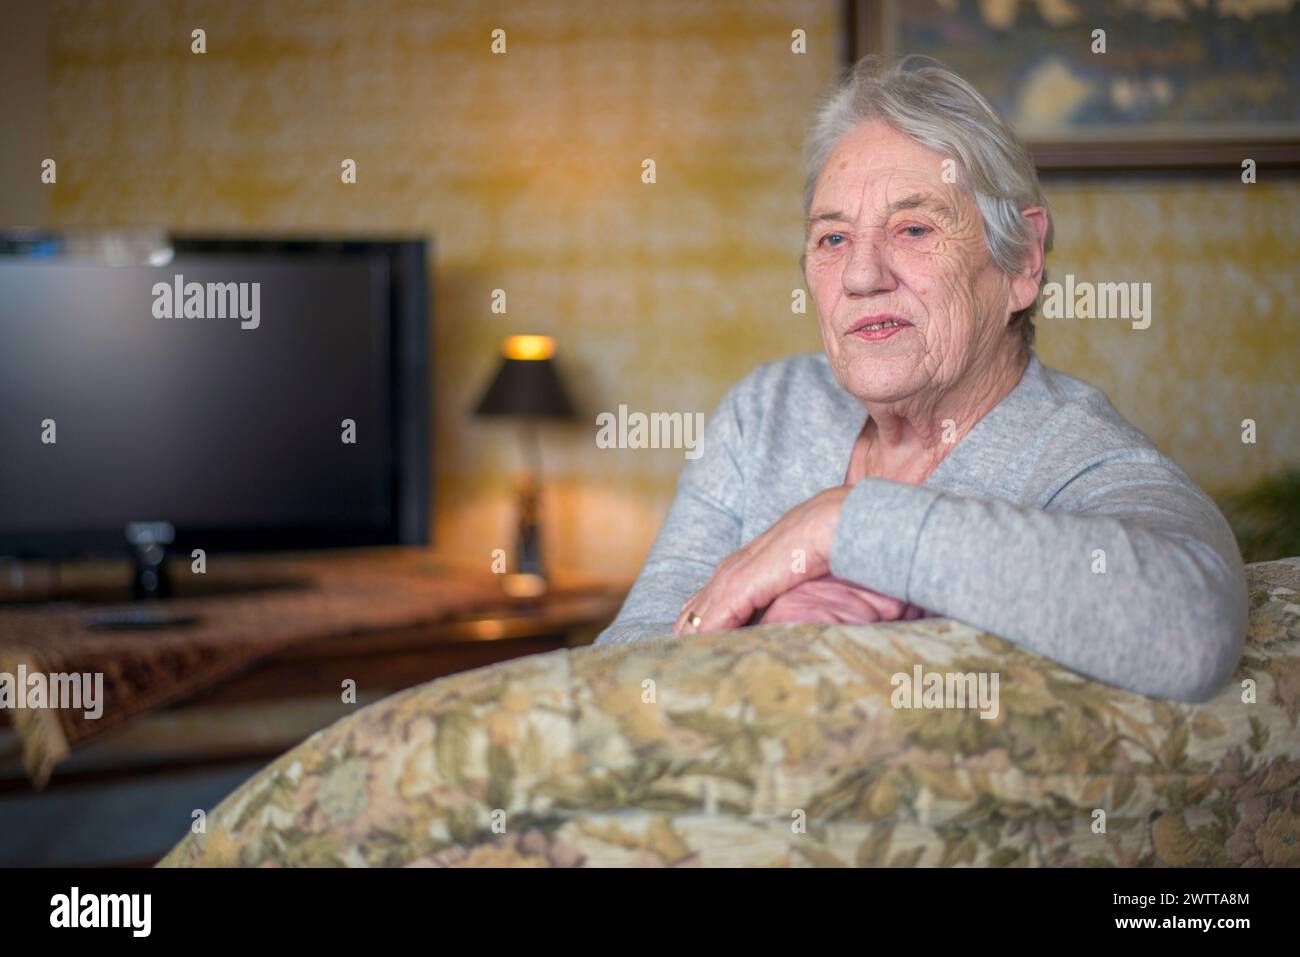 Elderly woman relaxing at home with a warm, contented smile. Stock Photo